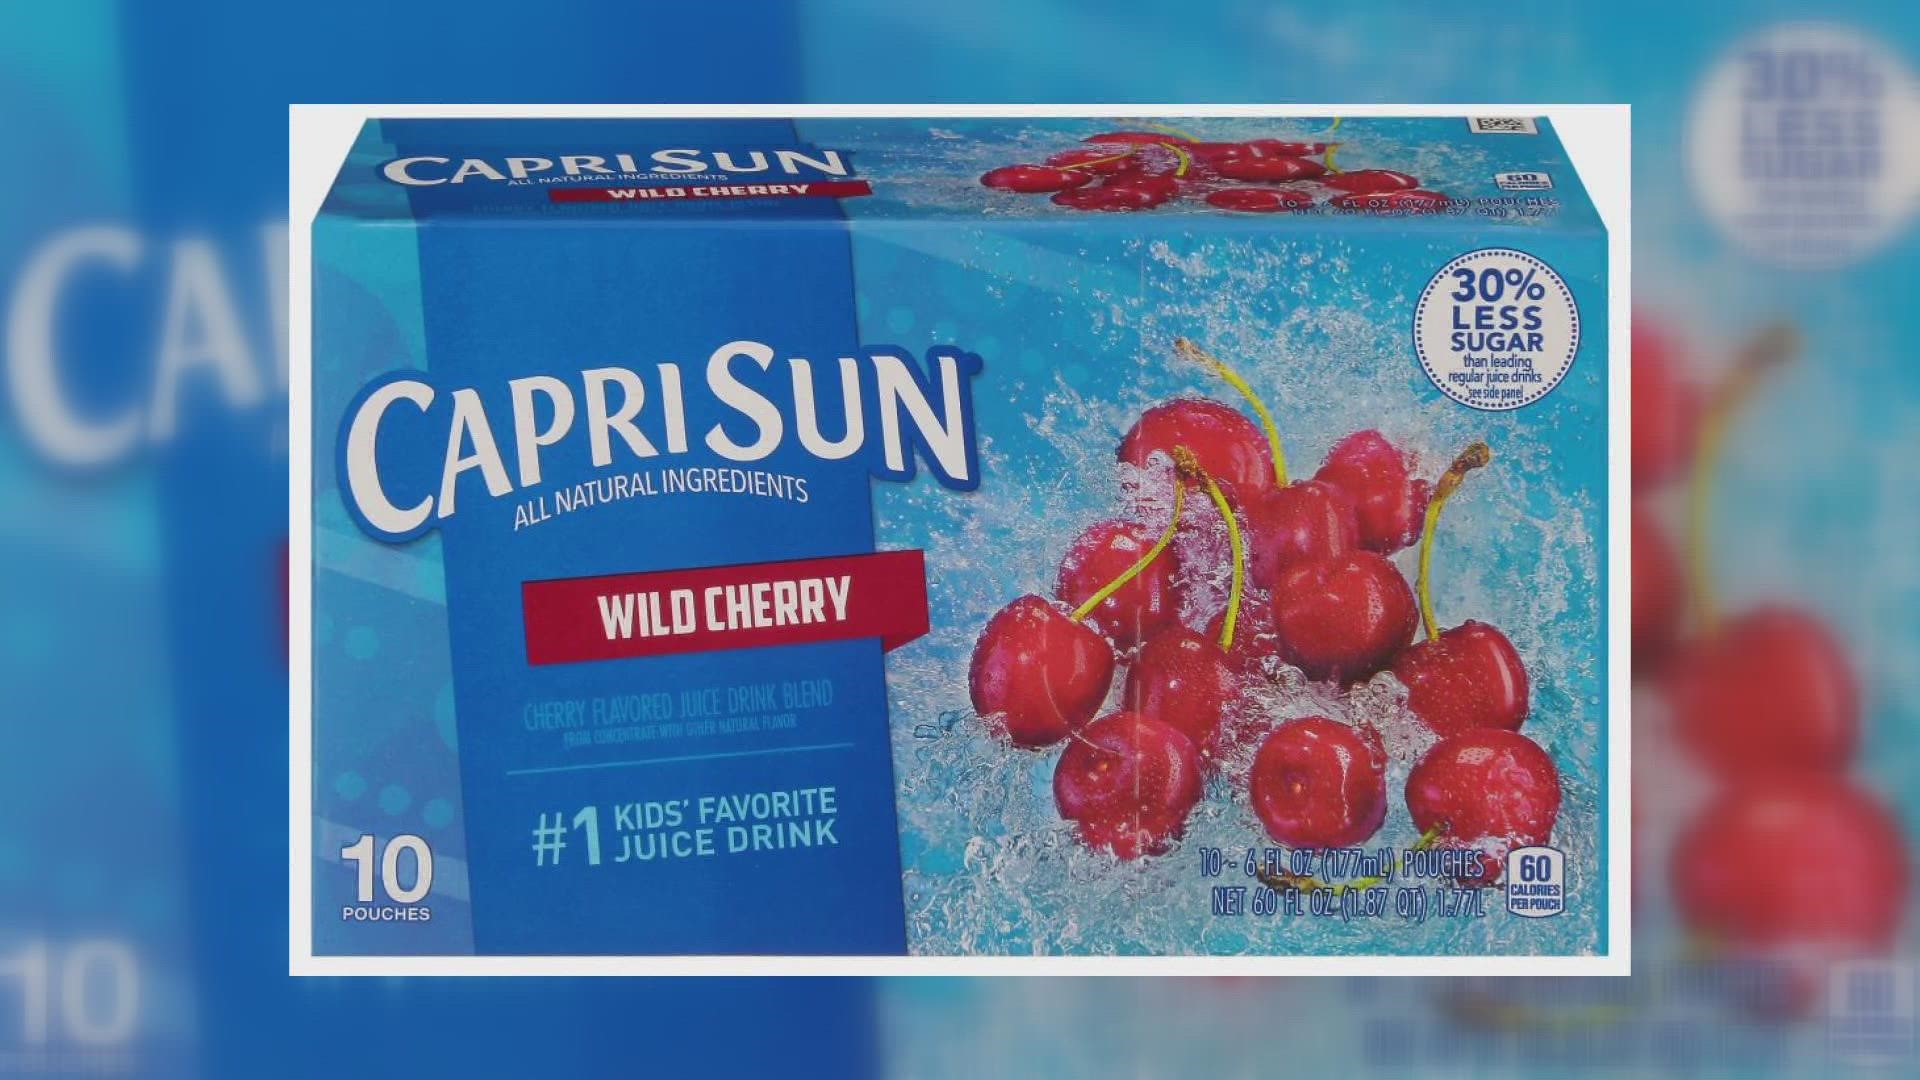 More than 5,000 boxes of wild cherry Capri Sun drinks were recalled for possible contamination of a cleaning solution.